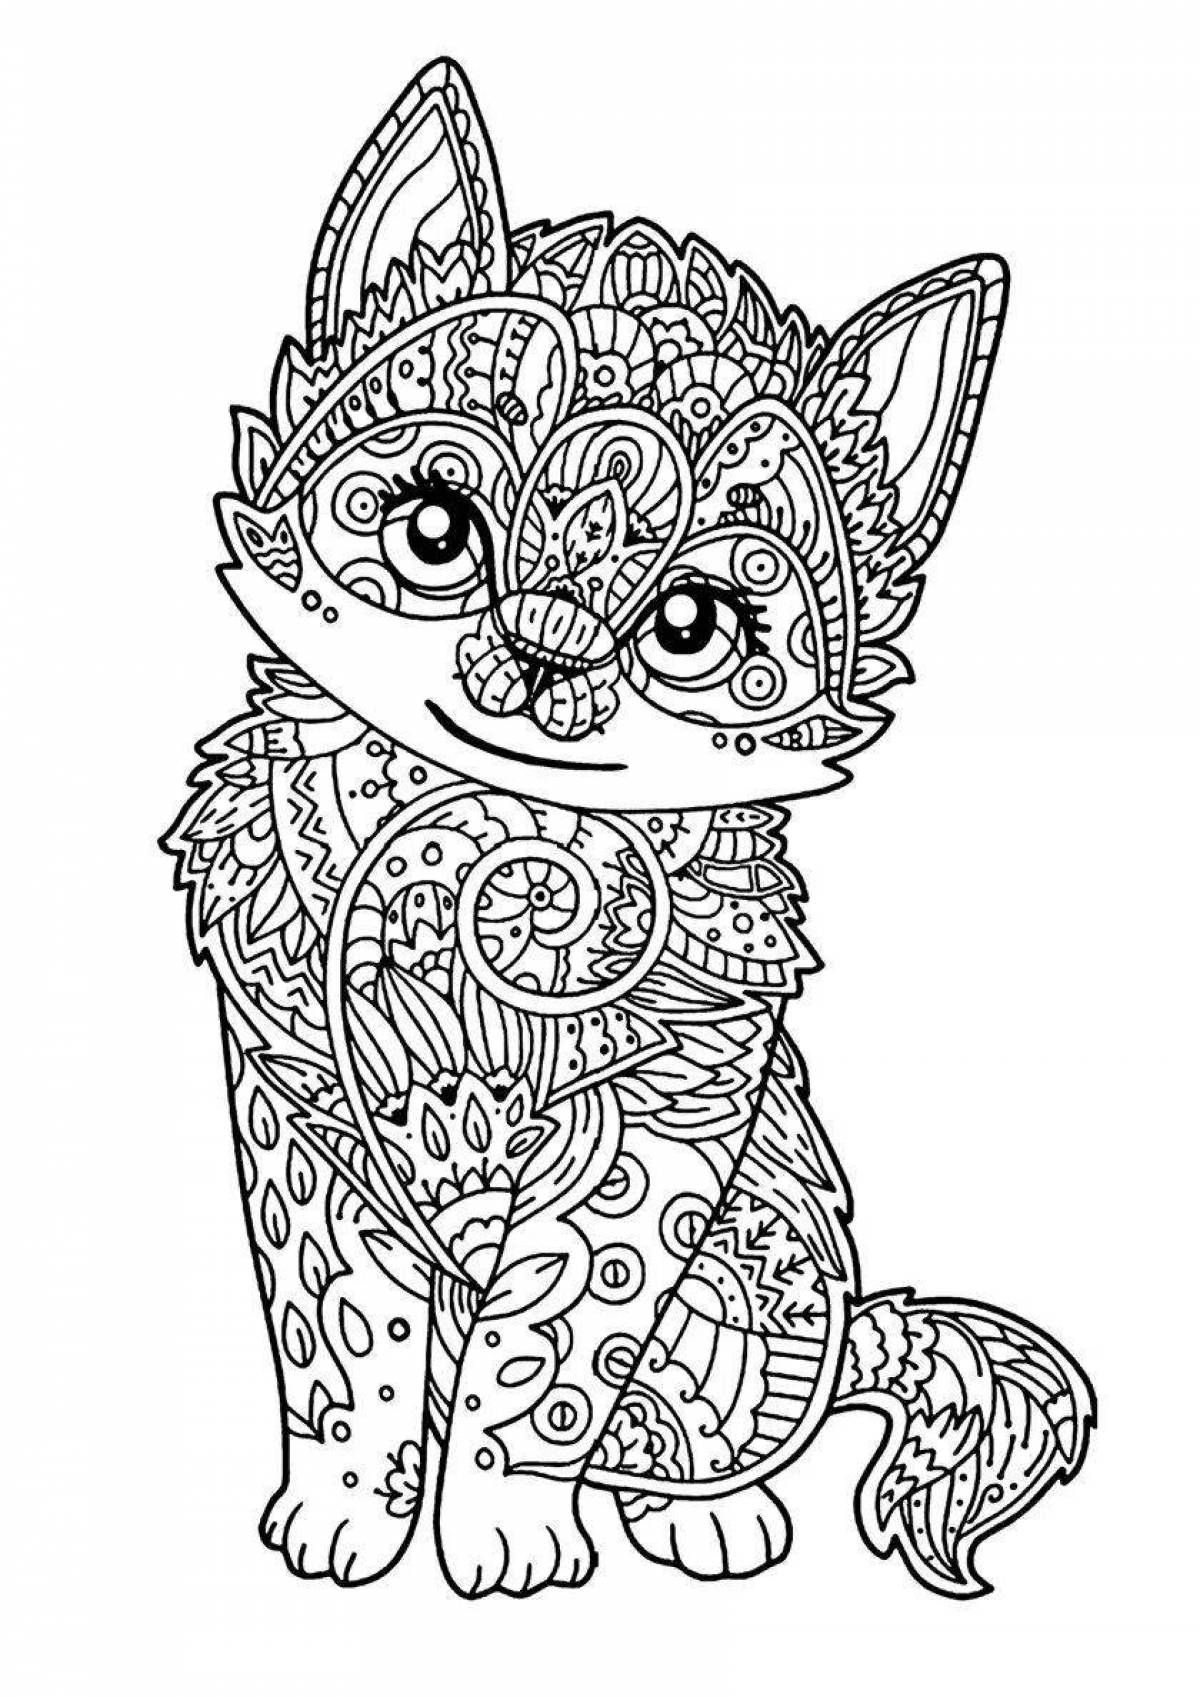 Exquisite anti-stress cat coloring book for girls